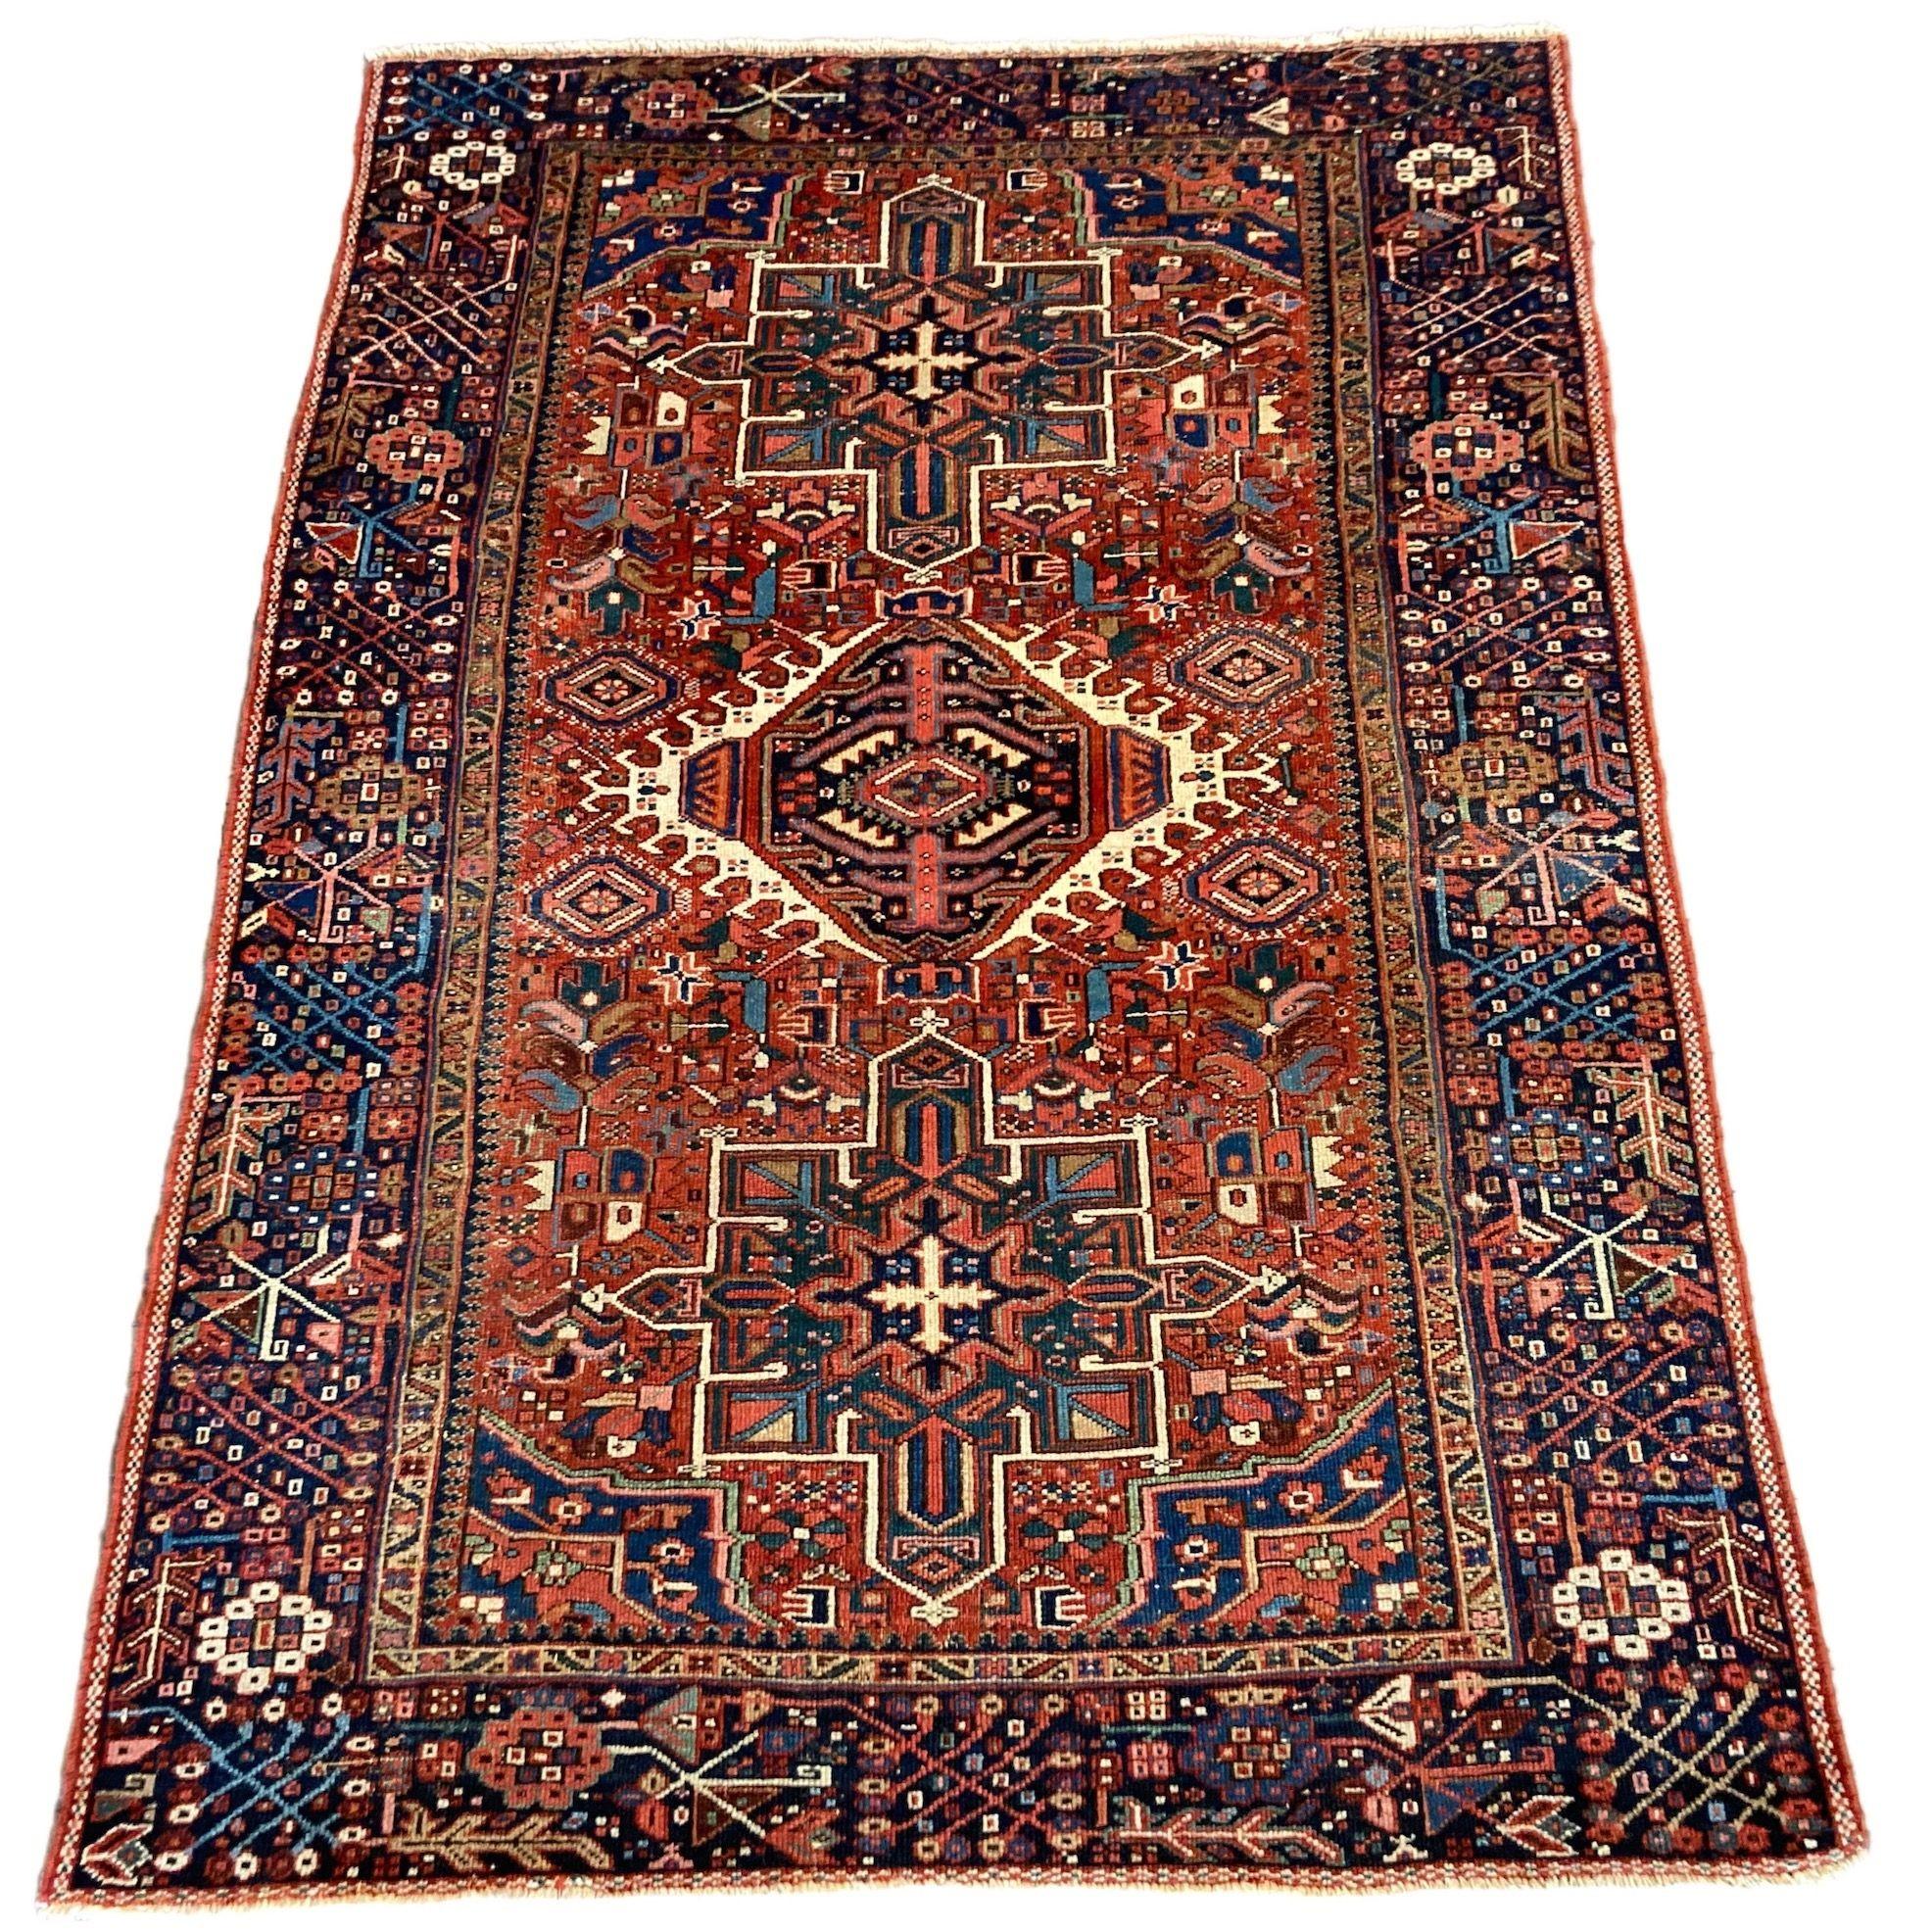 A beautiful antique Karadja rug, handwoven circa 1910 with a geometrical 3 medallion design on a terracotta field and deep indigo border. Fabulous secondary colours, especially the deep green in the medallions and highly decorative.
Size: 1.97m x